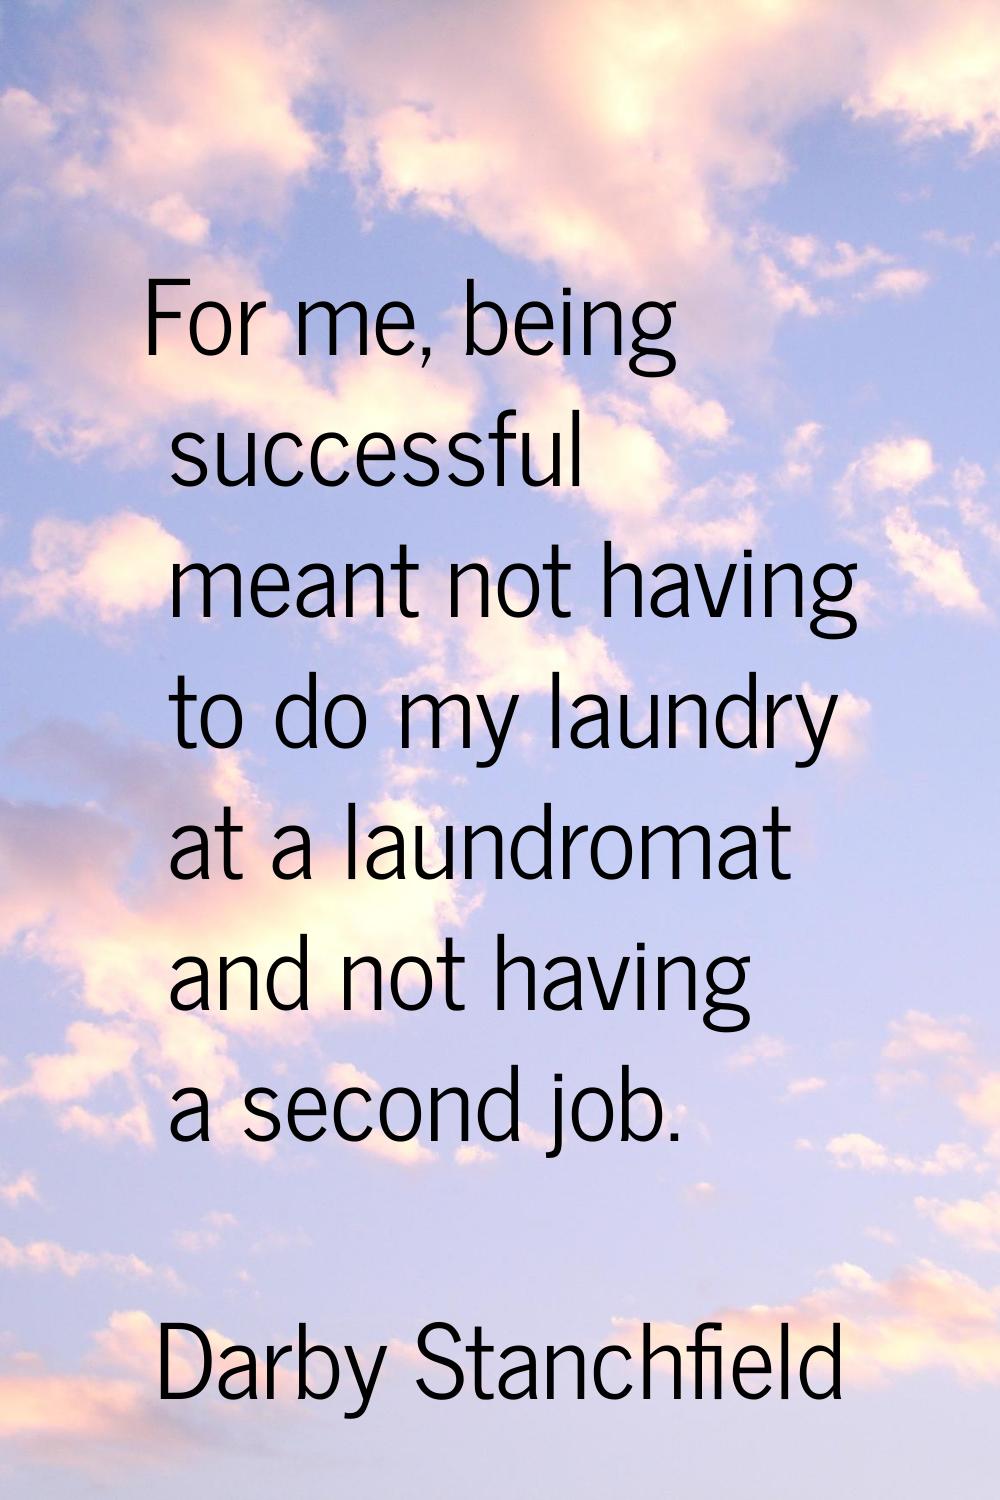 For me, being successful meant not having to do my laundry at a laundromat and not having a second 